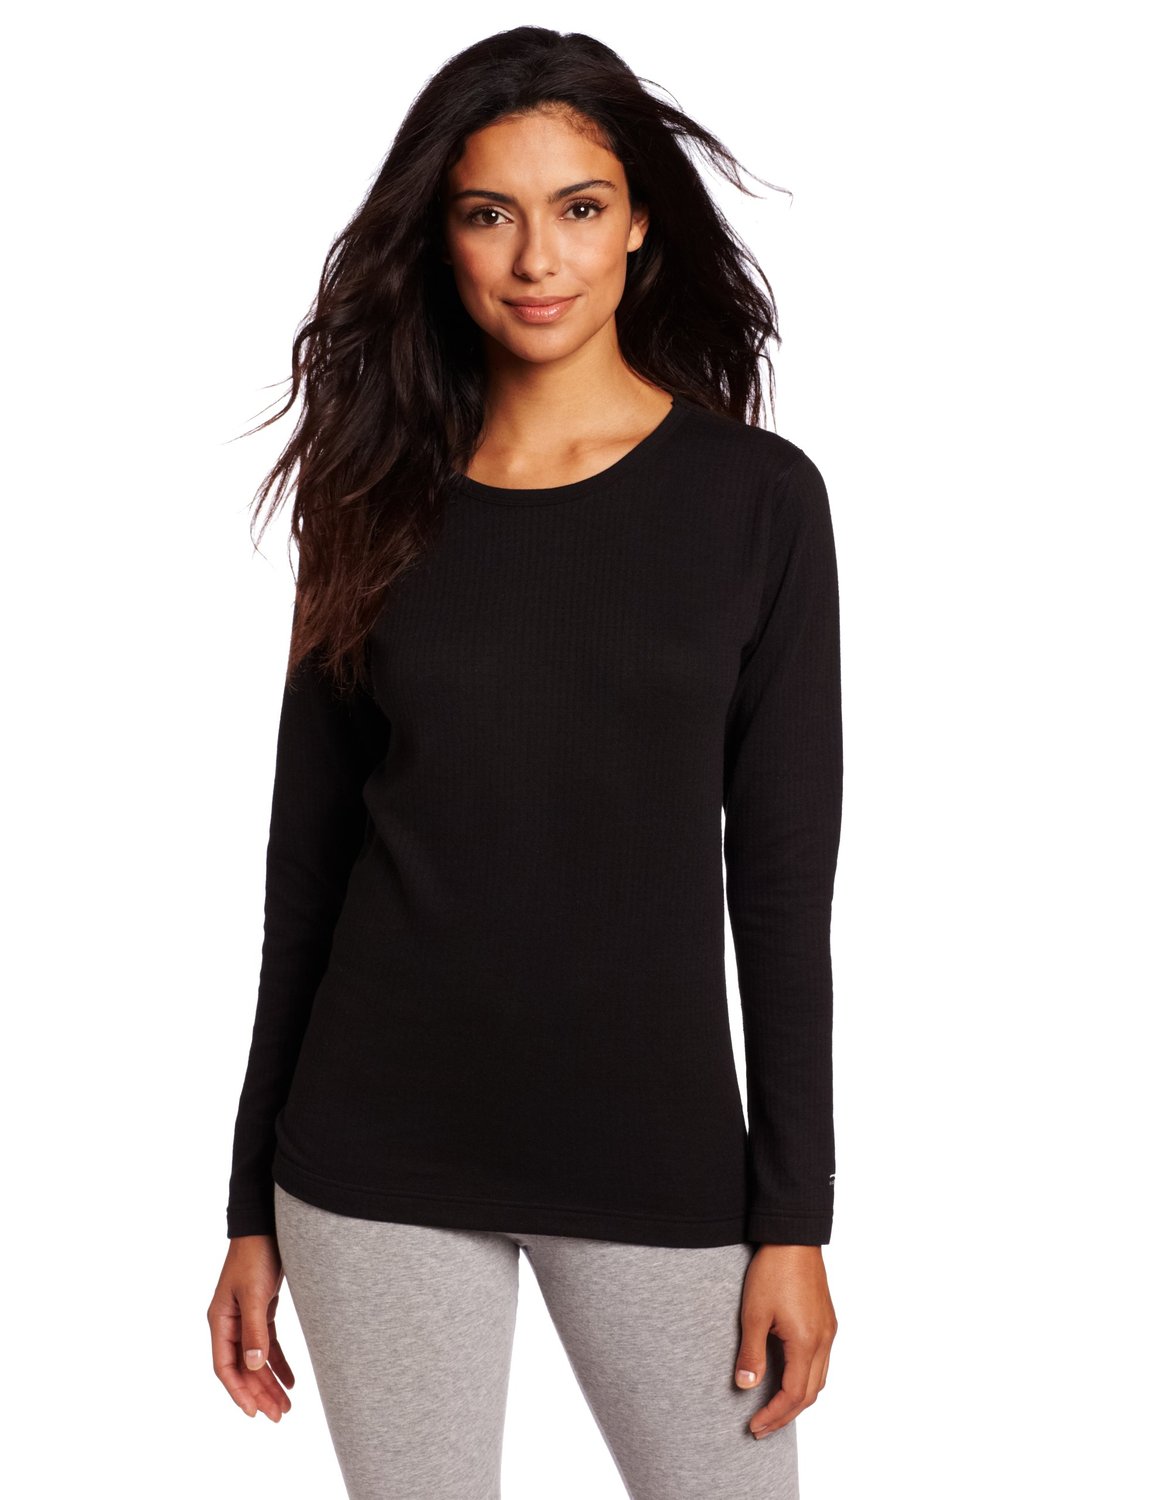 Duofold Women's Mid Weight Thermal Shirt